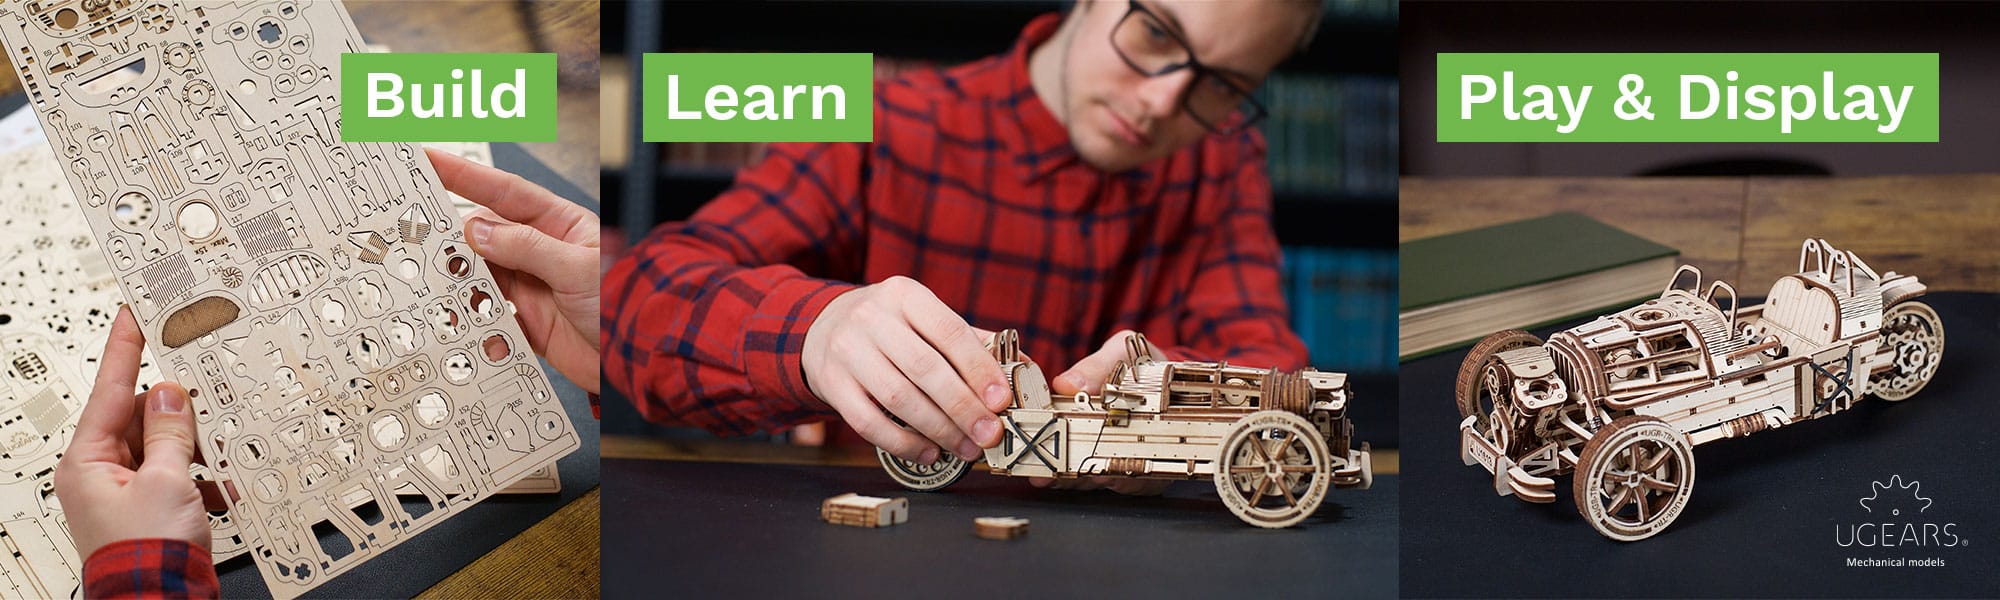 Ugears: Build, Learn, Play and Display